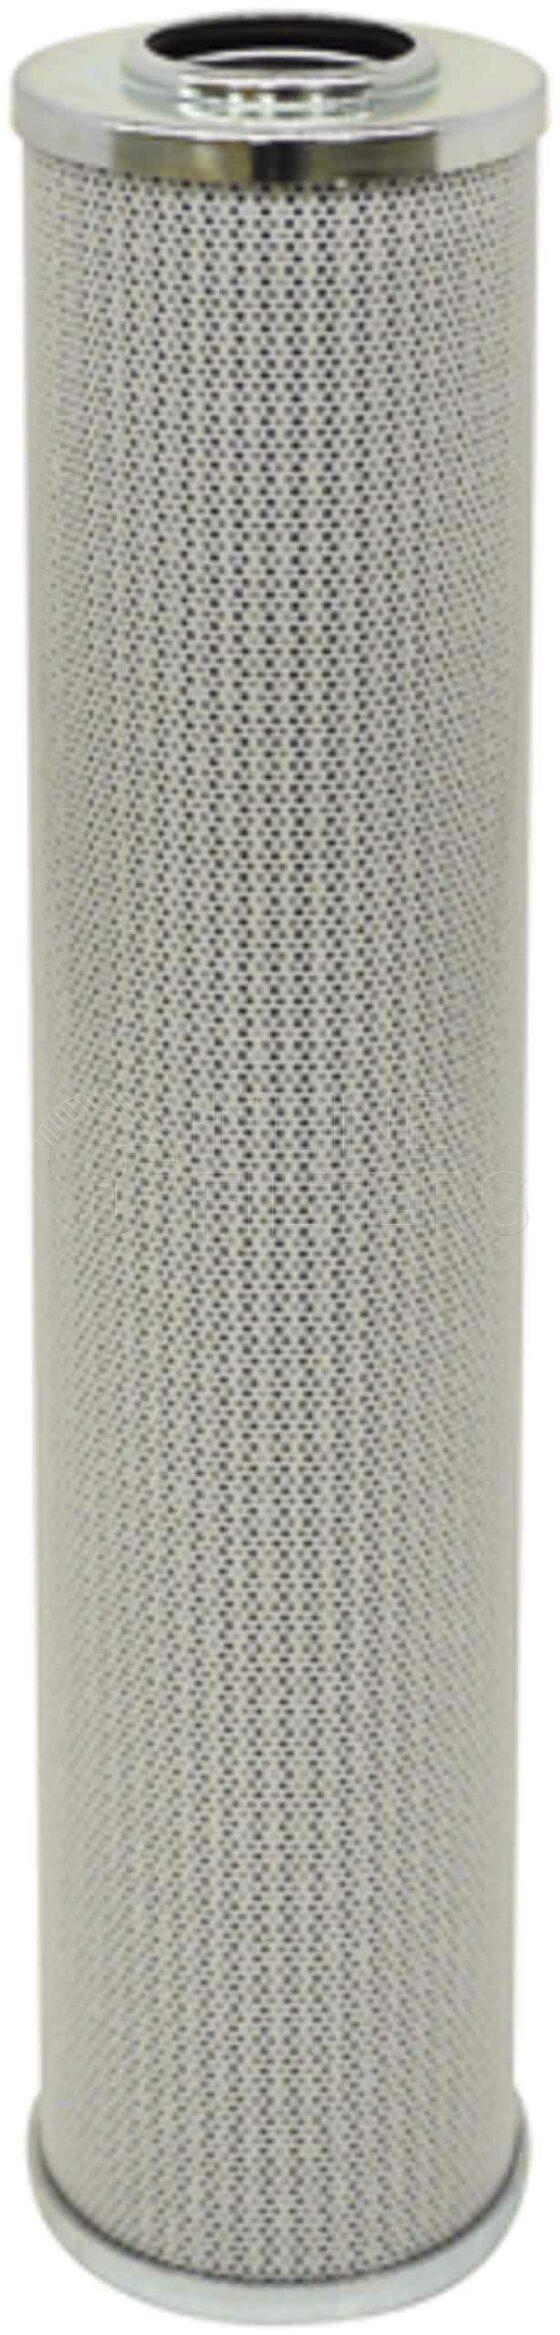 Baldwin PT23265-MPG. Baldwin – Hydraulic Filter Elements – PT23265-MPG OBSOLETE OBSOLETE. Availability Limited to Dealer Stock. Length 14 (355.6) Compatible Competitor Part Number Hydac 1252797, 280D005BN3HC, 280D005BNHC, 280D005BNHC3 Outside Diameter 2 3/8 (60.3) Inside Diameter 1 1/32 (26.2) One End Product Type Maximum Performance Glass Hydraulic Element Application Hydac Applications Brand Baldwin Division Engine Mobile Aftermarket Industry […]